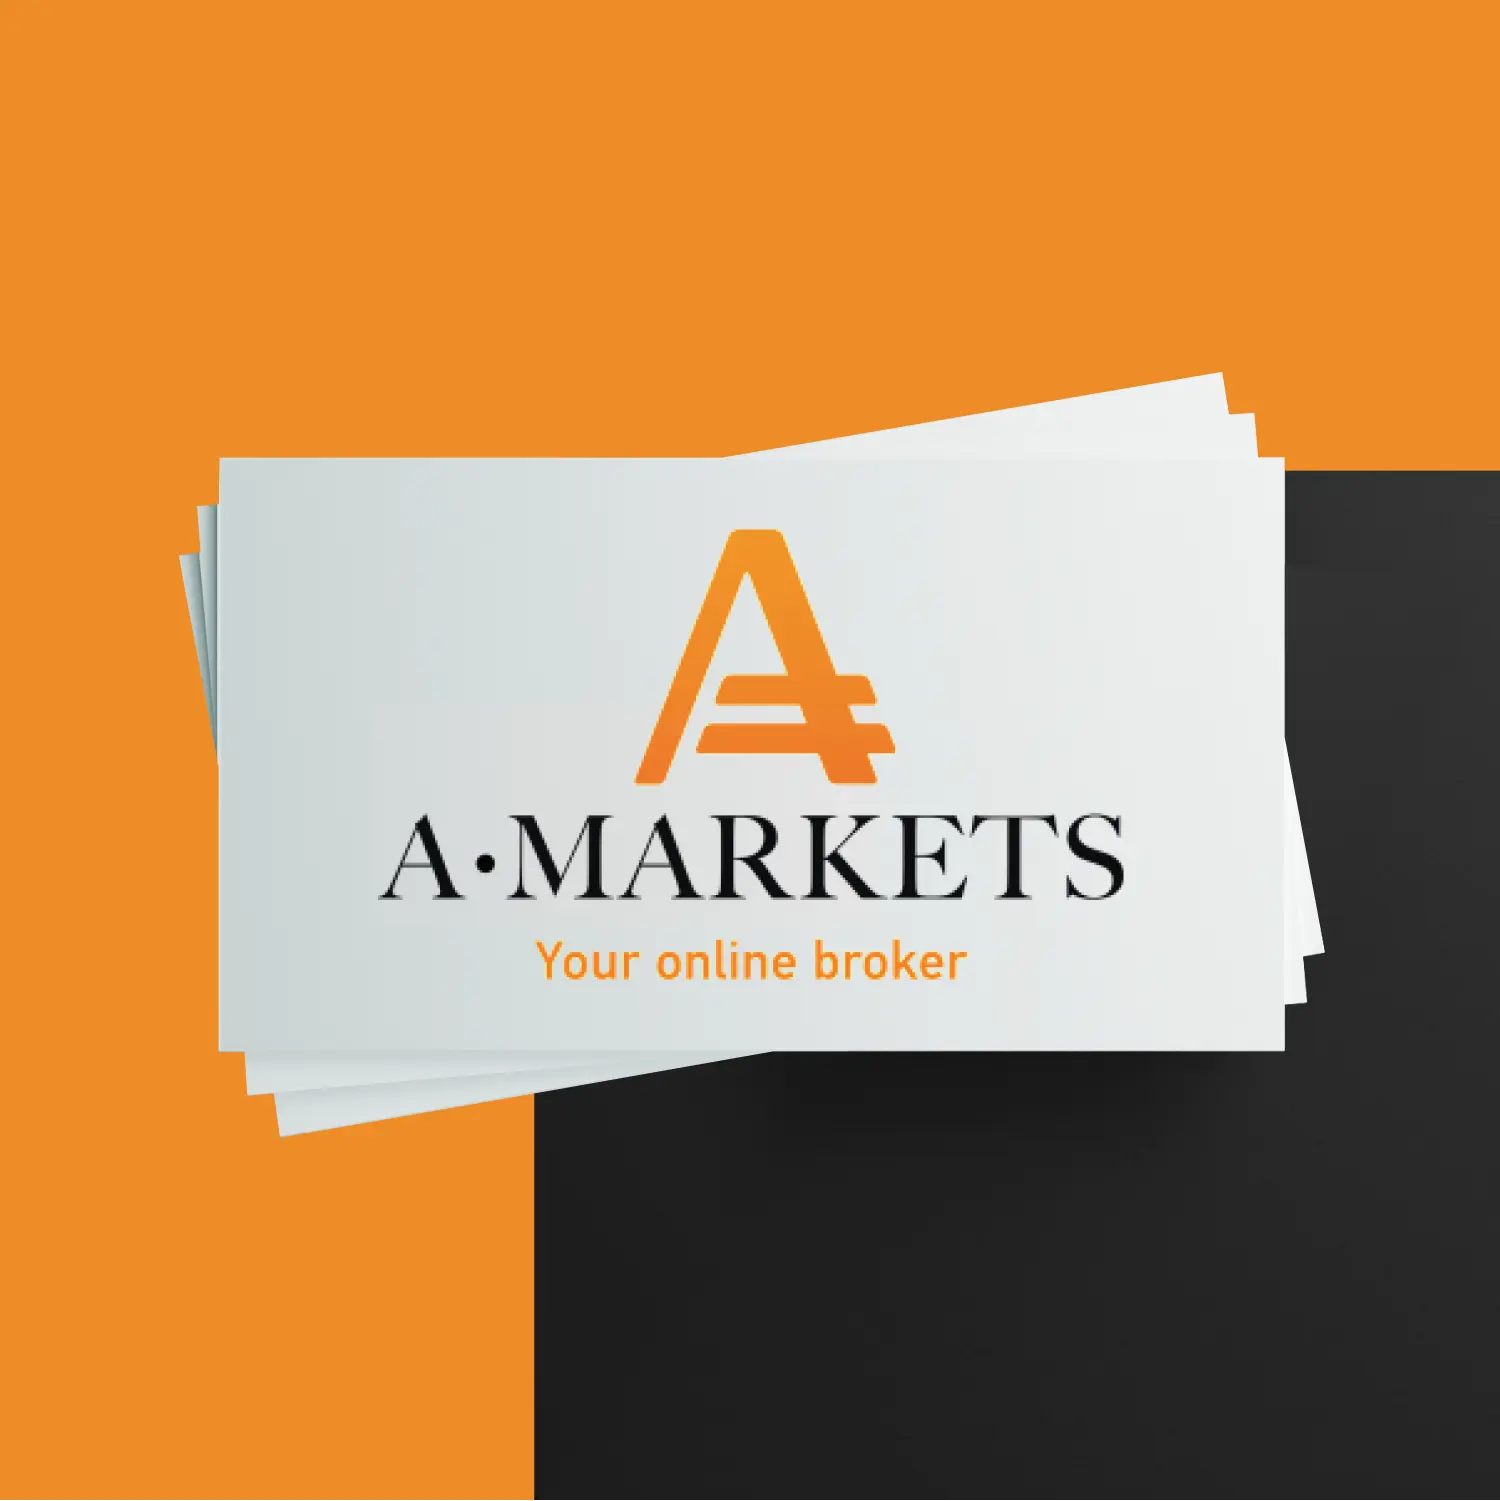 Does registering in the Amatiz Broker require authentication?